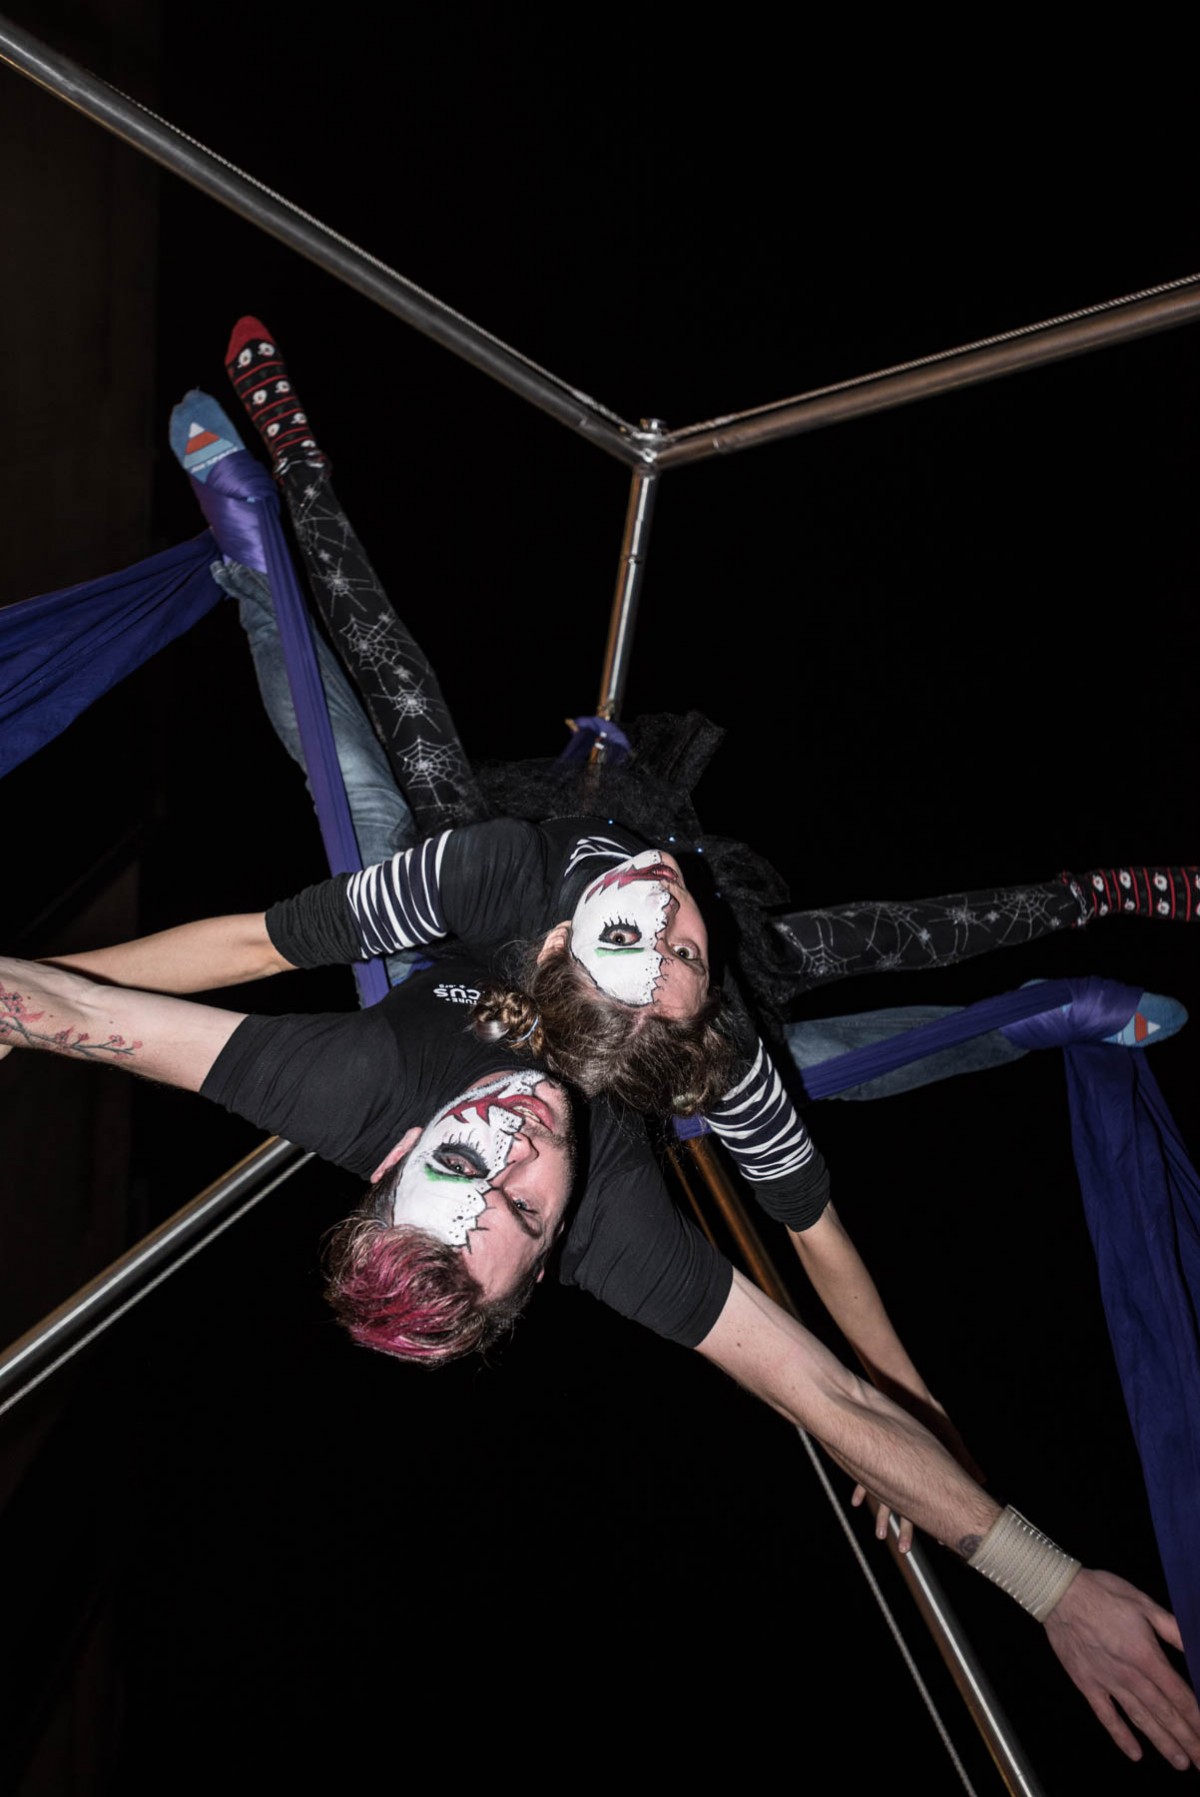 The aerial performers from Adventure Circus were on hand to impress with their brave mid air stunts!